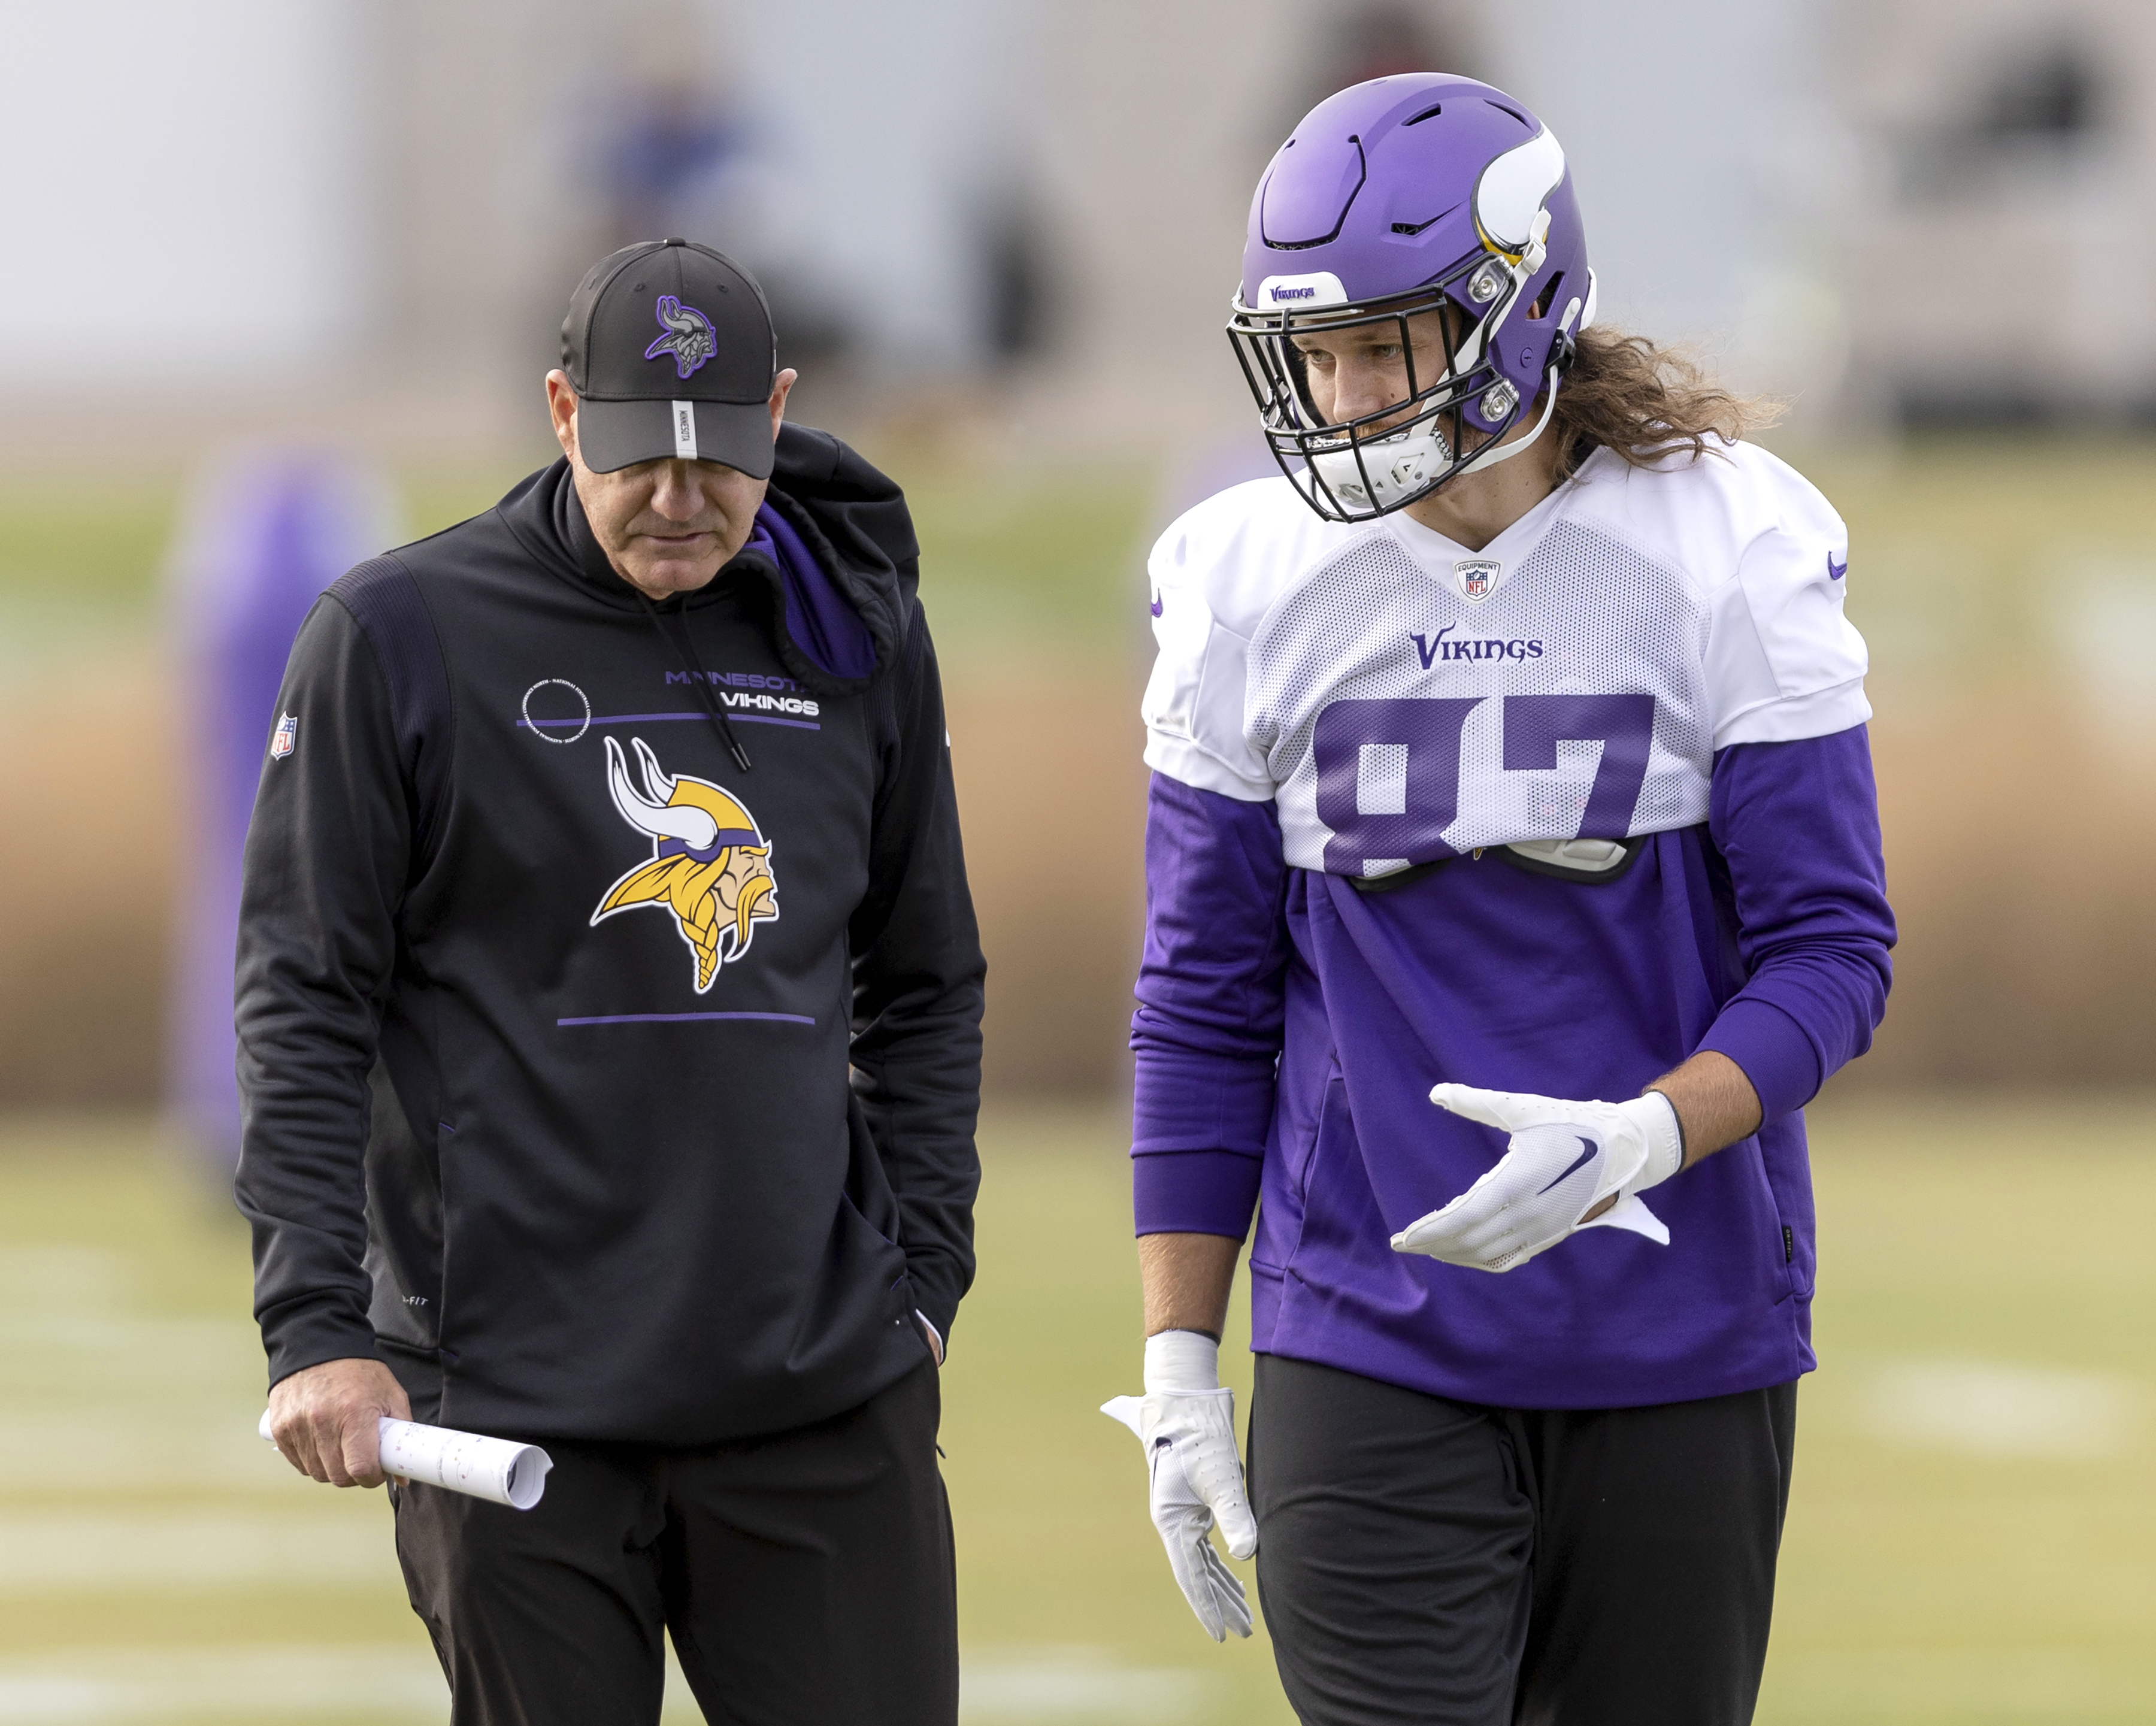 Newly acquired Minnesota Vikings tight end T.J. Hockenson (87) speaks with a coach during NFL football practice on Wednesday, Nov. 2, 2022, in Eagan, Minn. Hockenson has been one of the league’s most productive pass-catching tight ends since the Lions picked him eighth overall in the first round of the 2019 draft out of Iowa. (Carlos Gonzalez/Star Tribune via AP)